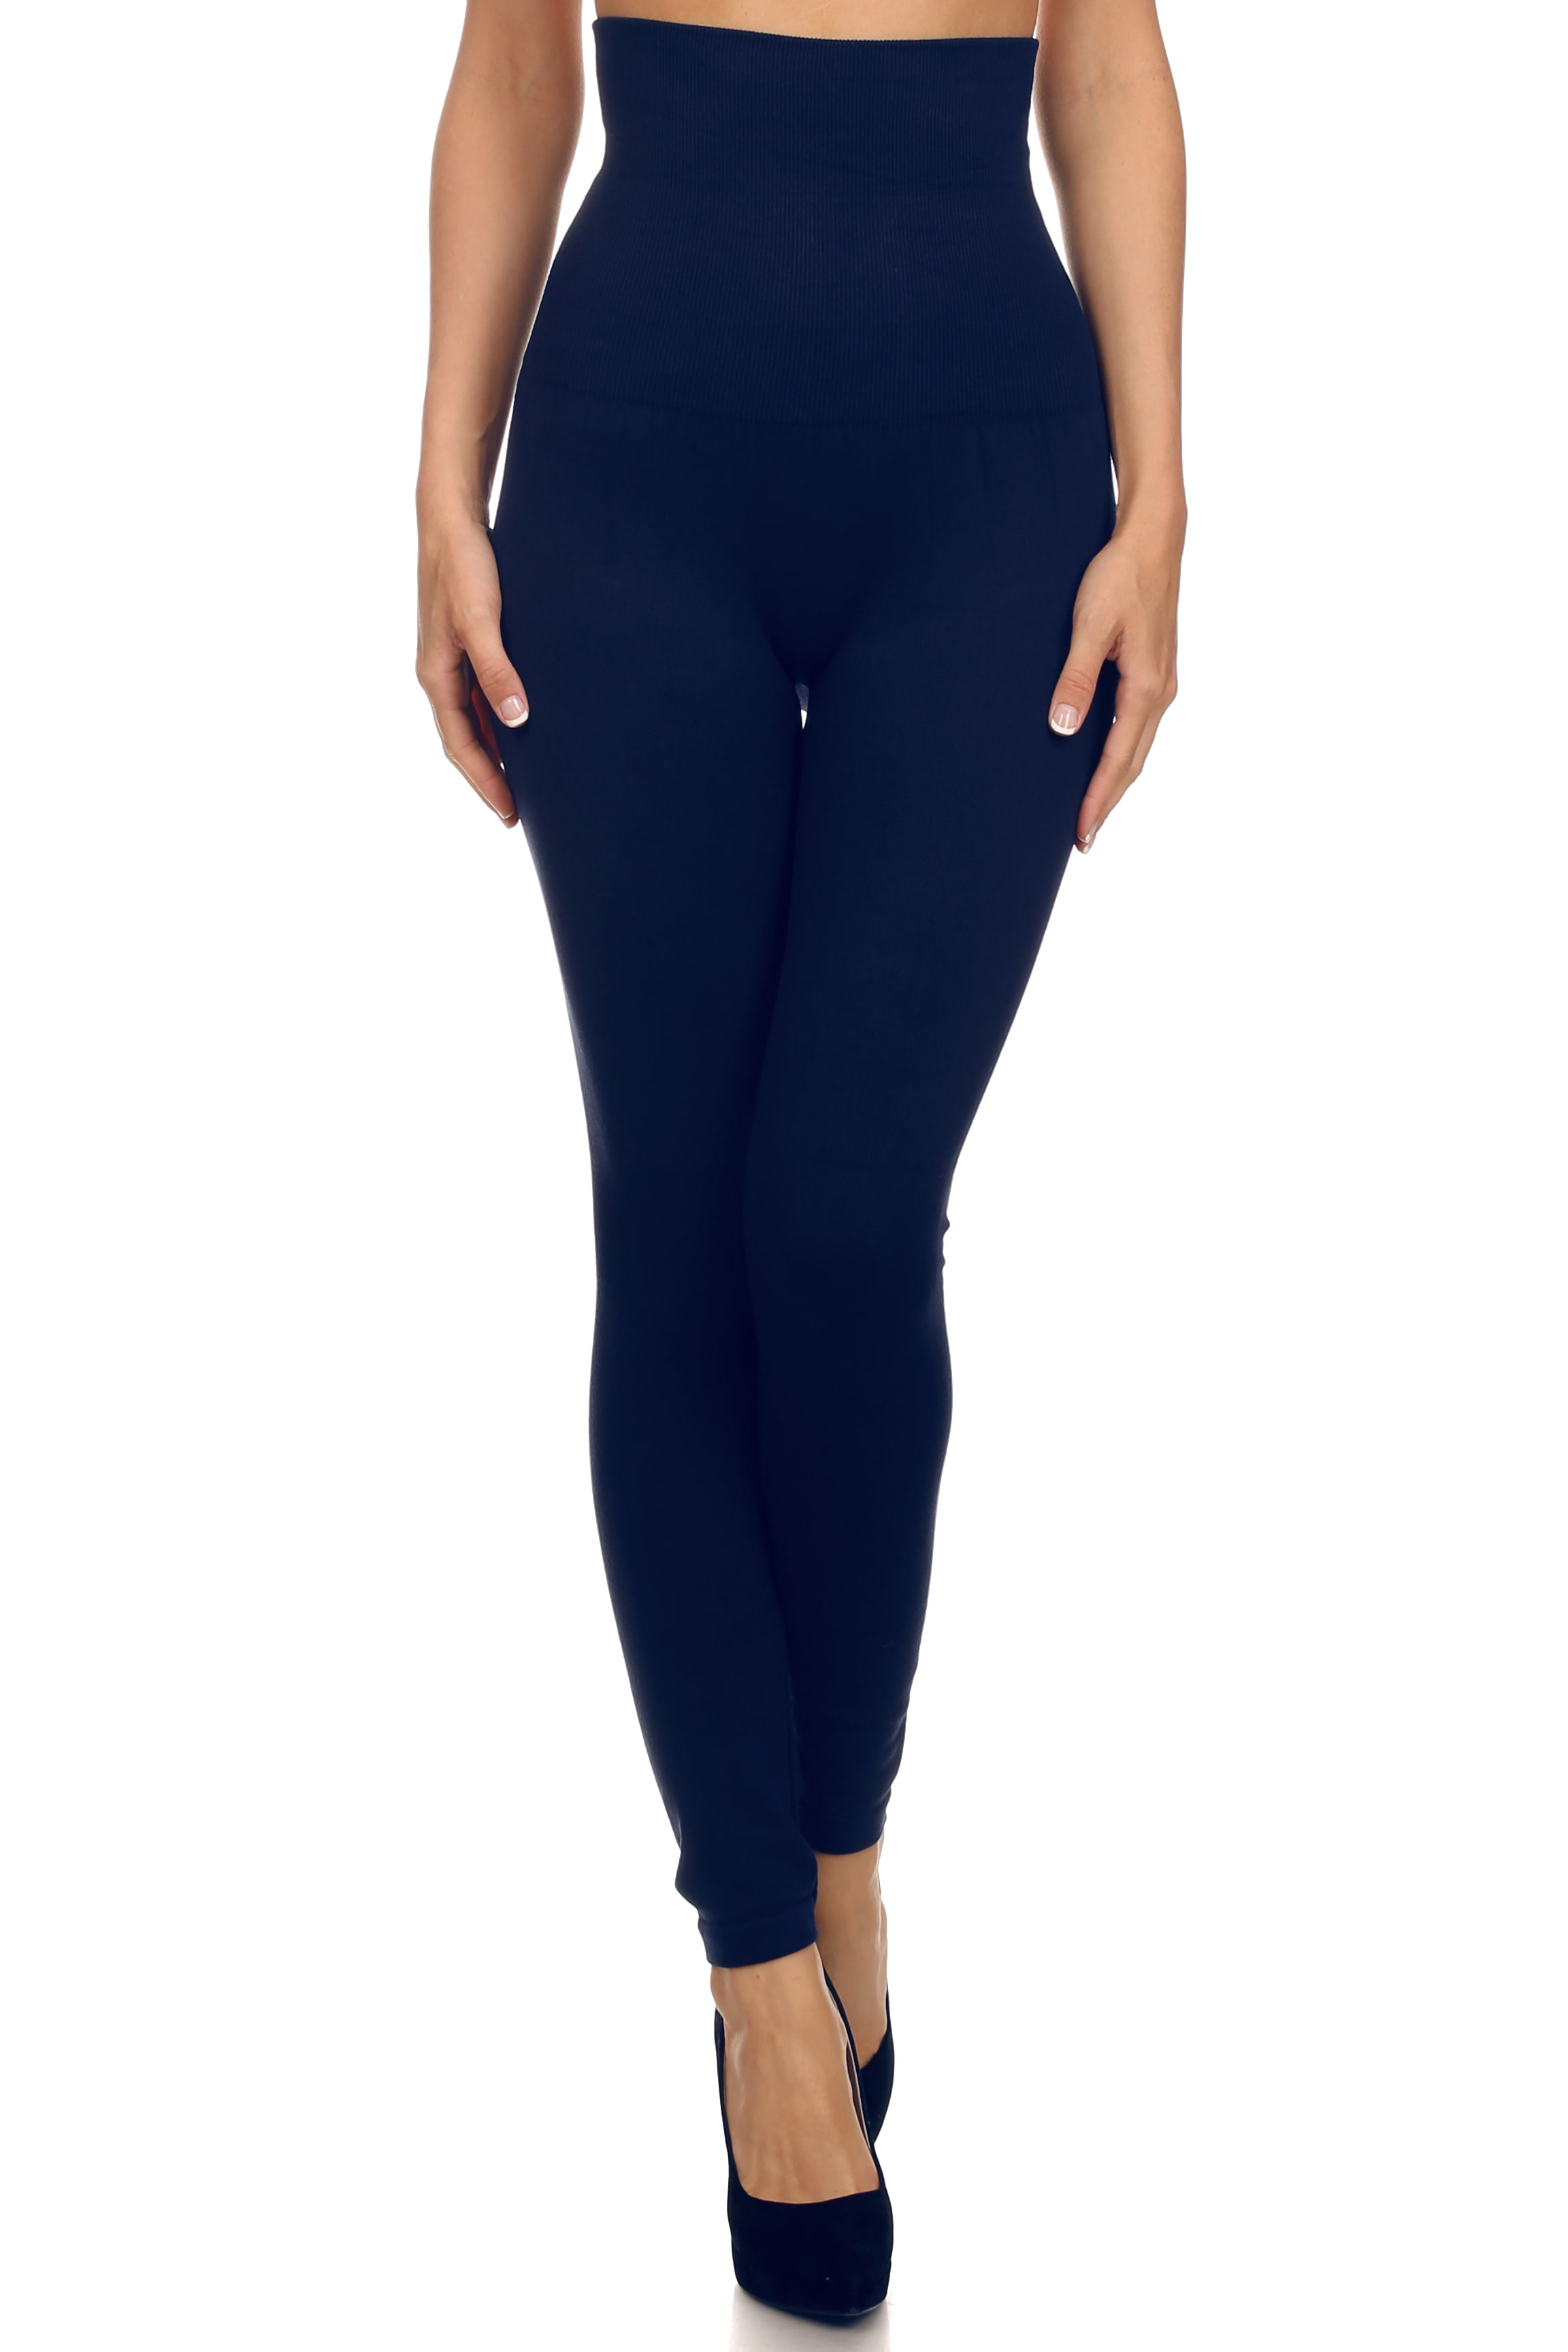 Women's High Waist Control Top Compression Leggings (Navy, One Size)